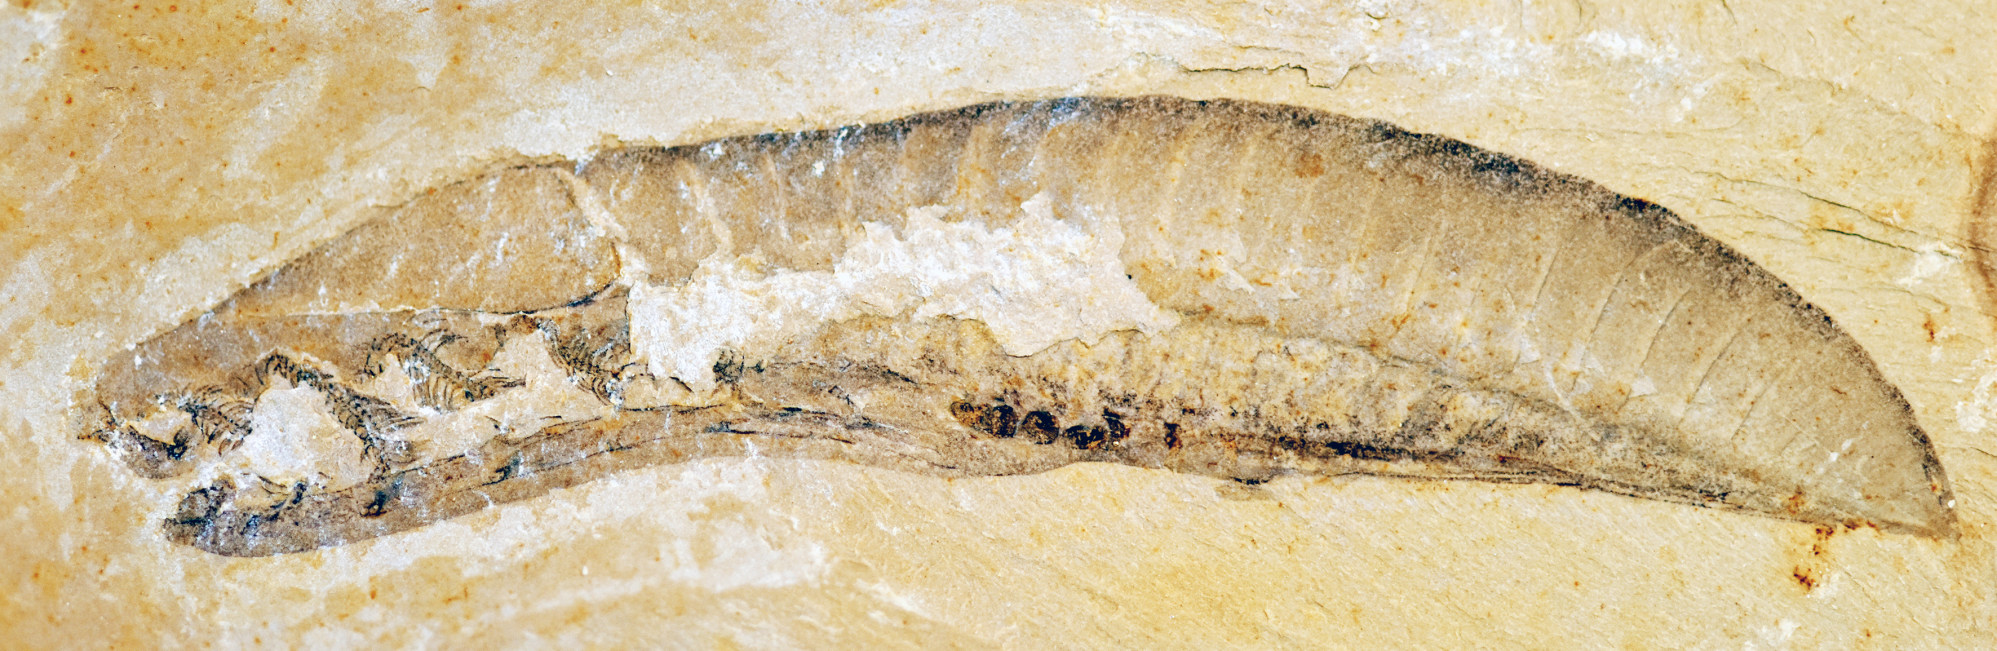 The yunnanozoaon specimen in this fossil is 3.9cm long. Photo: Zhao Fangchen